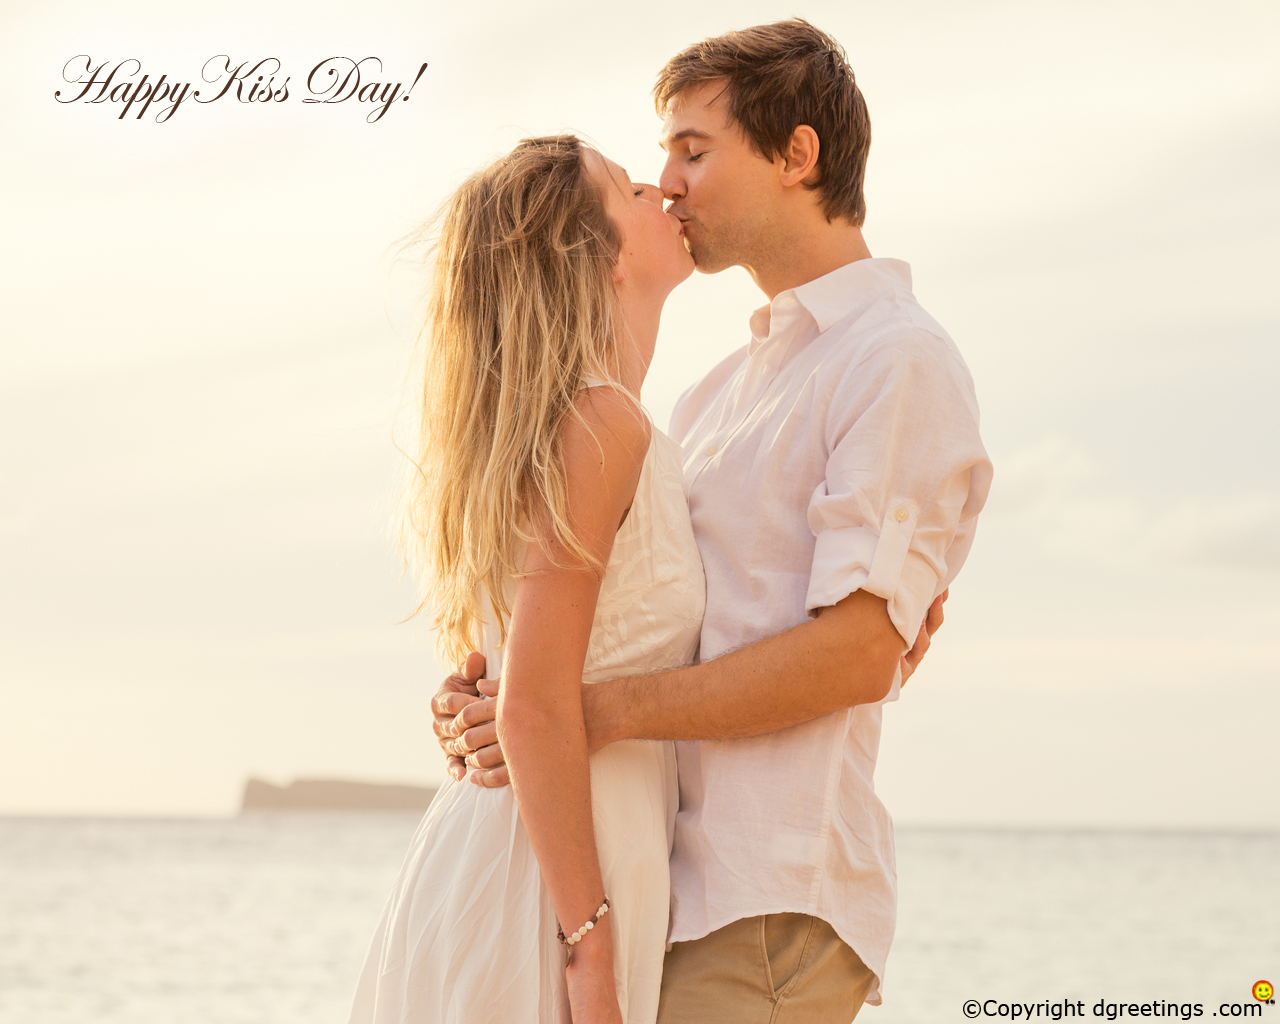 Kiss Day Wallpapers - Kiss Day Quotes For Girlfriend , HD Wallpaper & Backgrounds